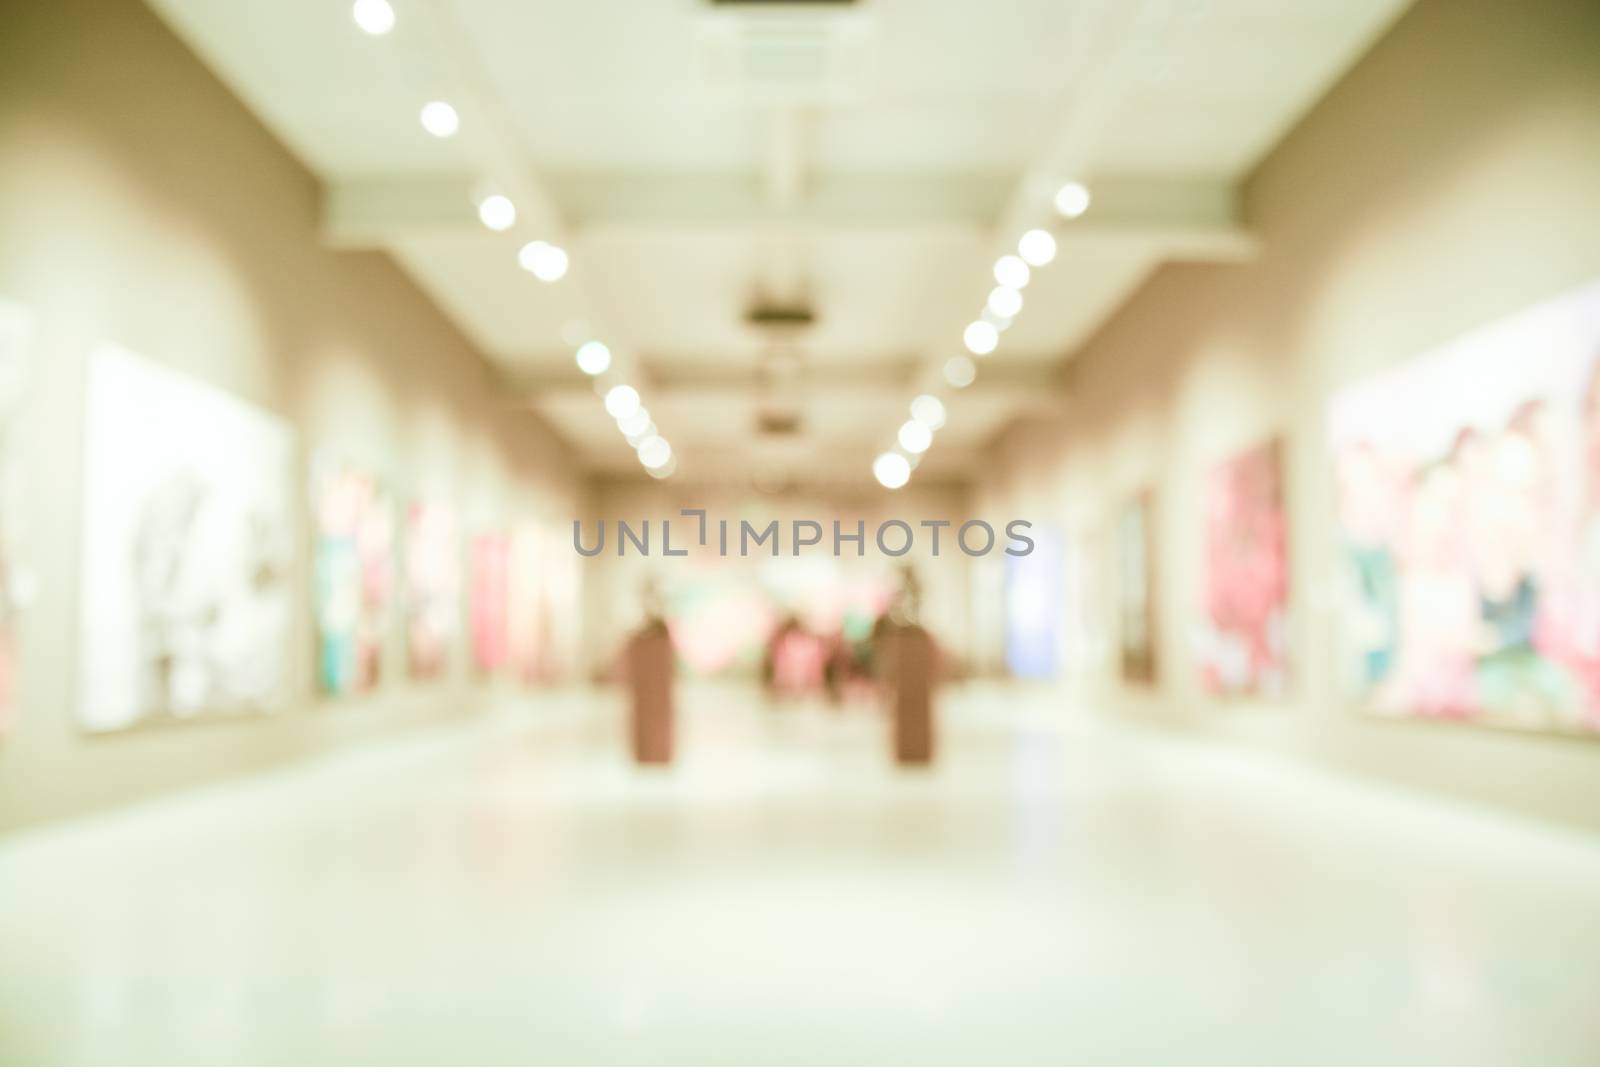 Blur or Defocus image Background of the lobby of modern art center Museum with bokeh